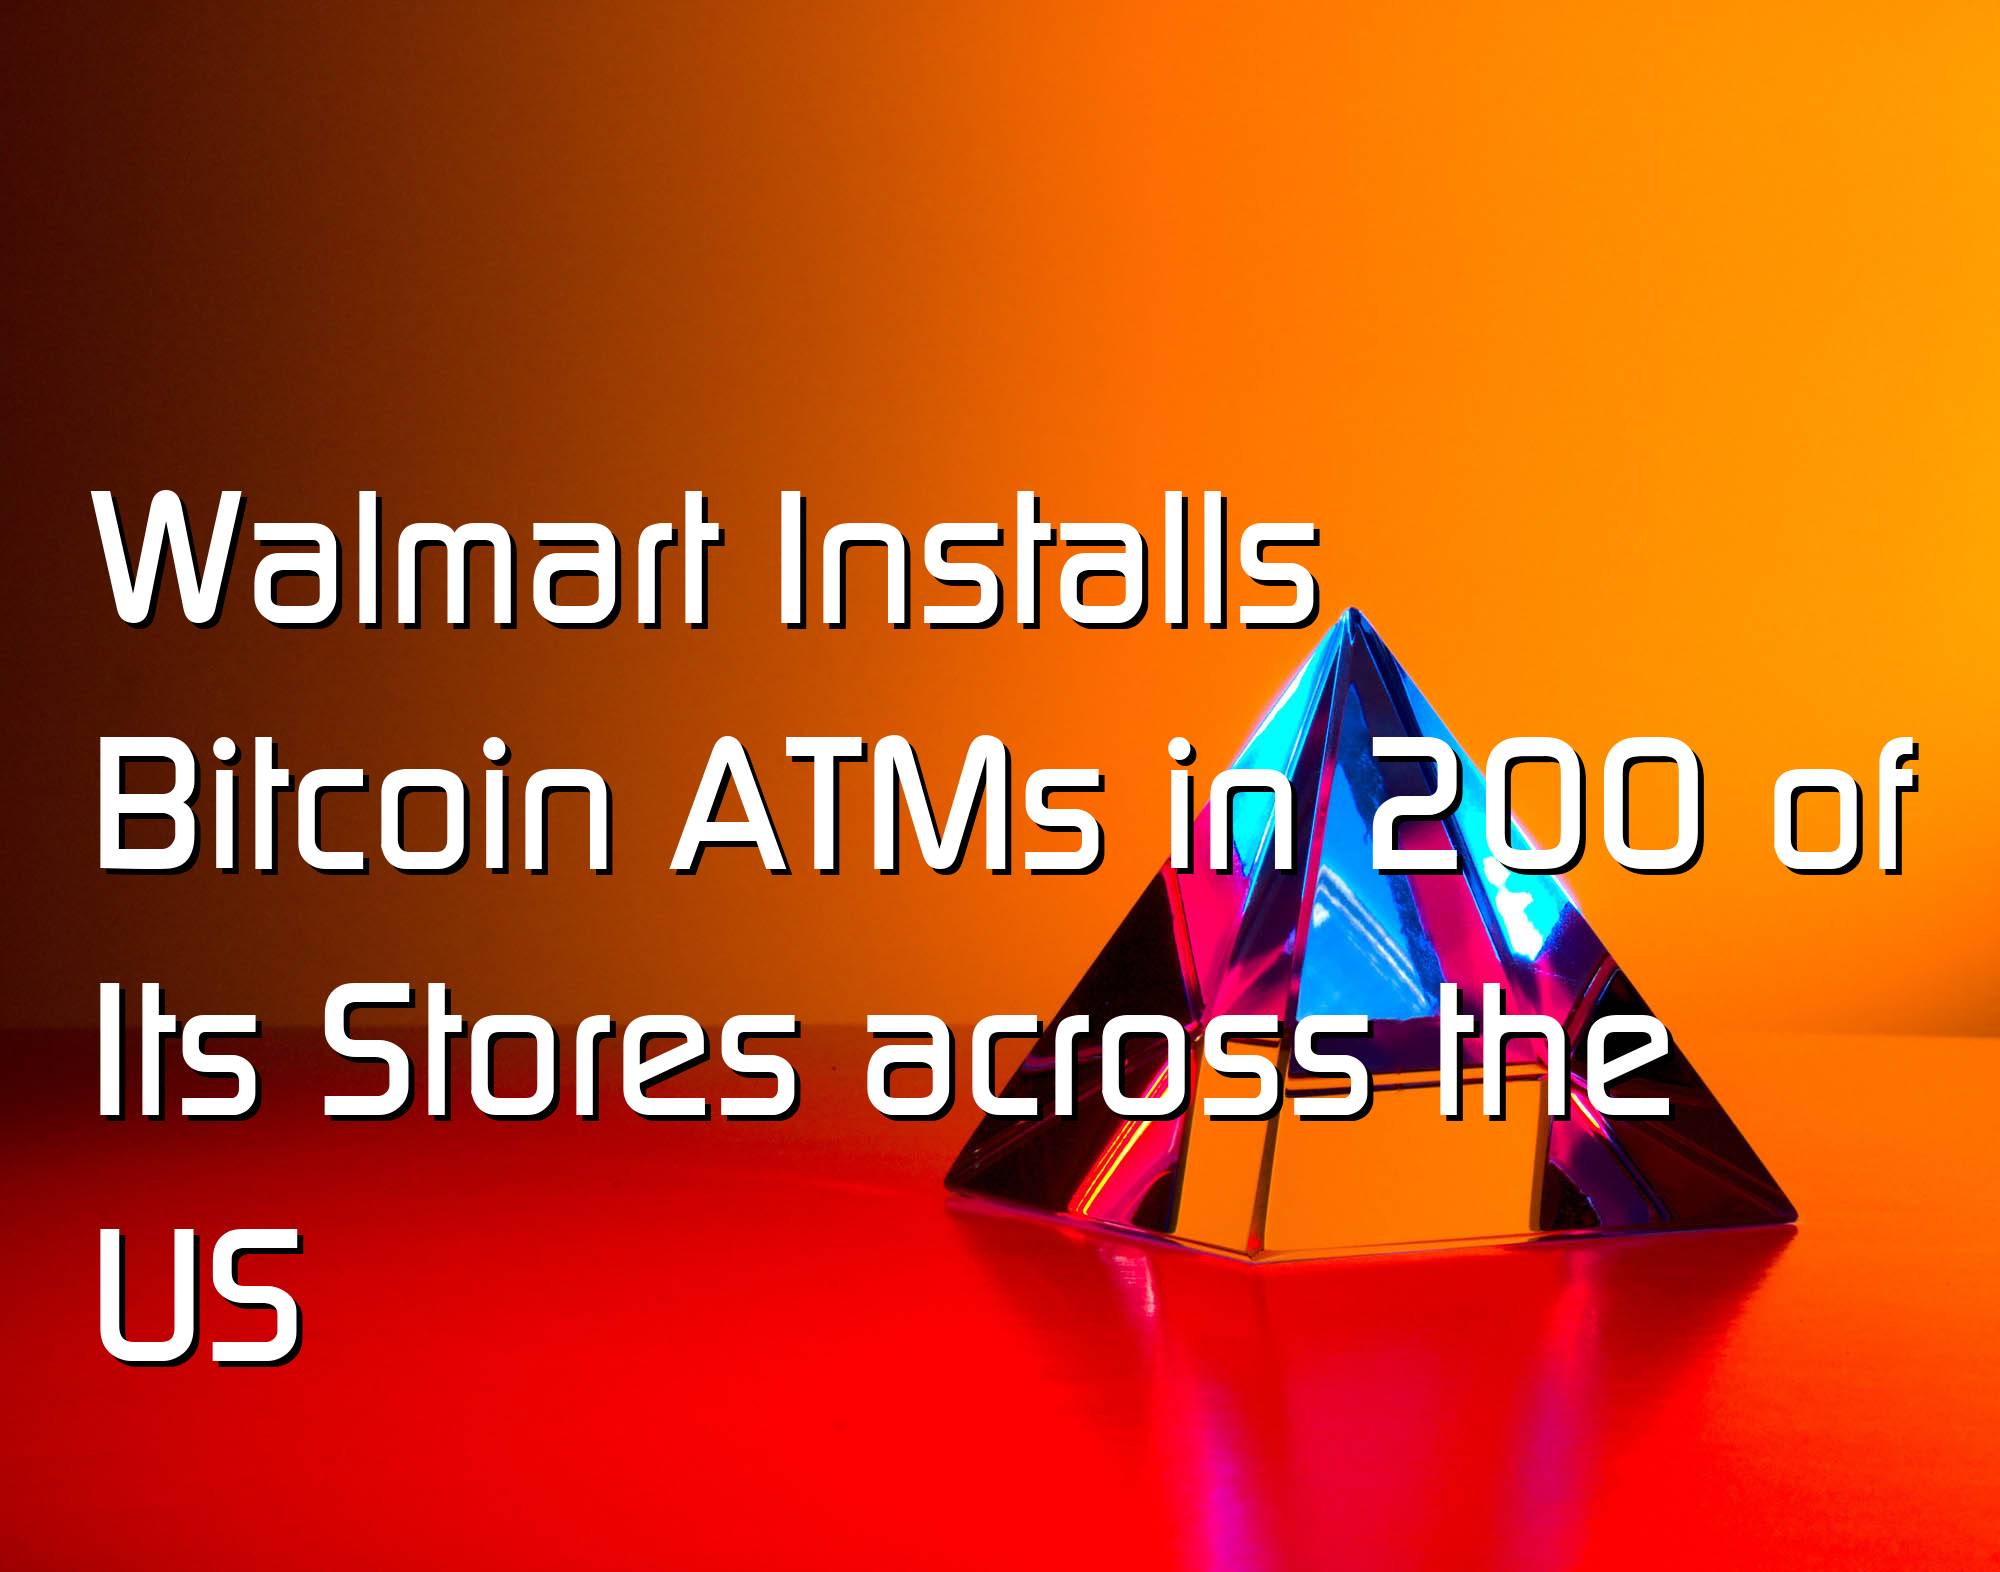 @$61198.46 Walmart Installs Bitcoin ATMs in 200 of Its Stores across the US